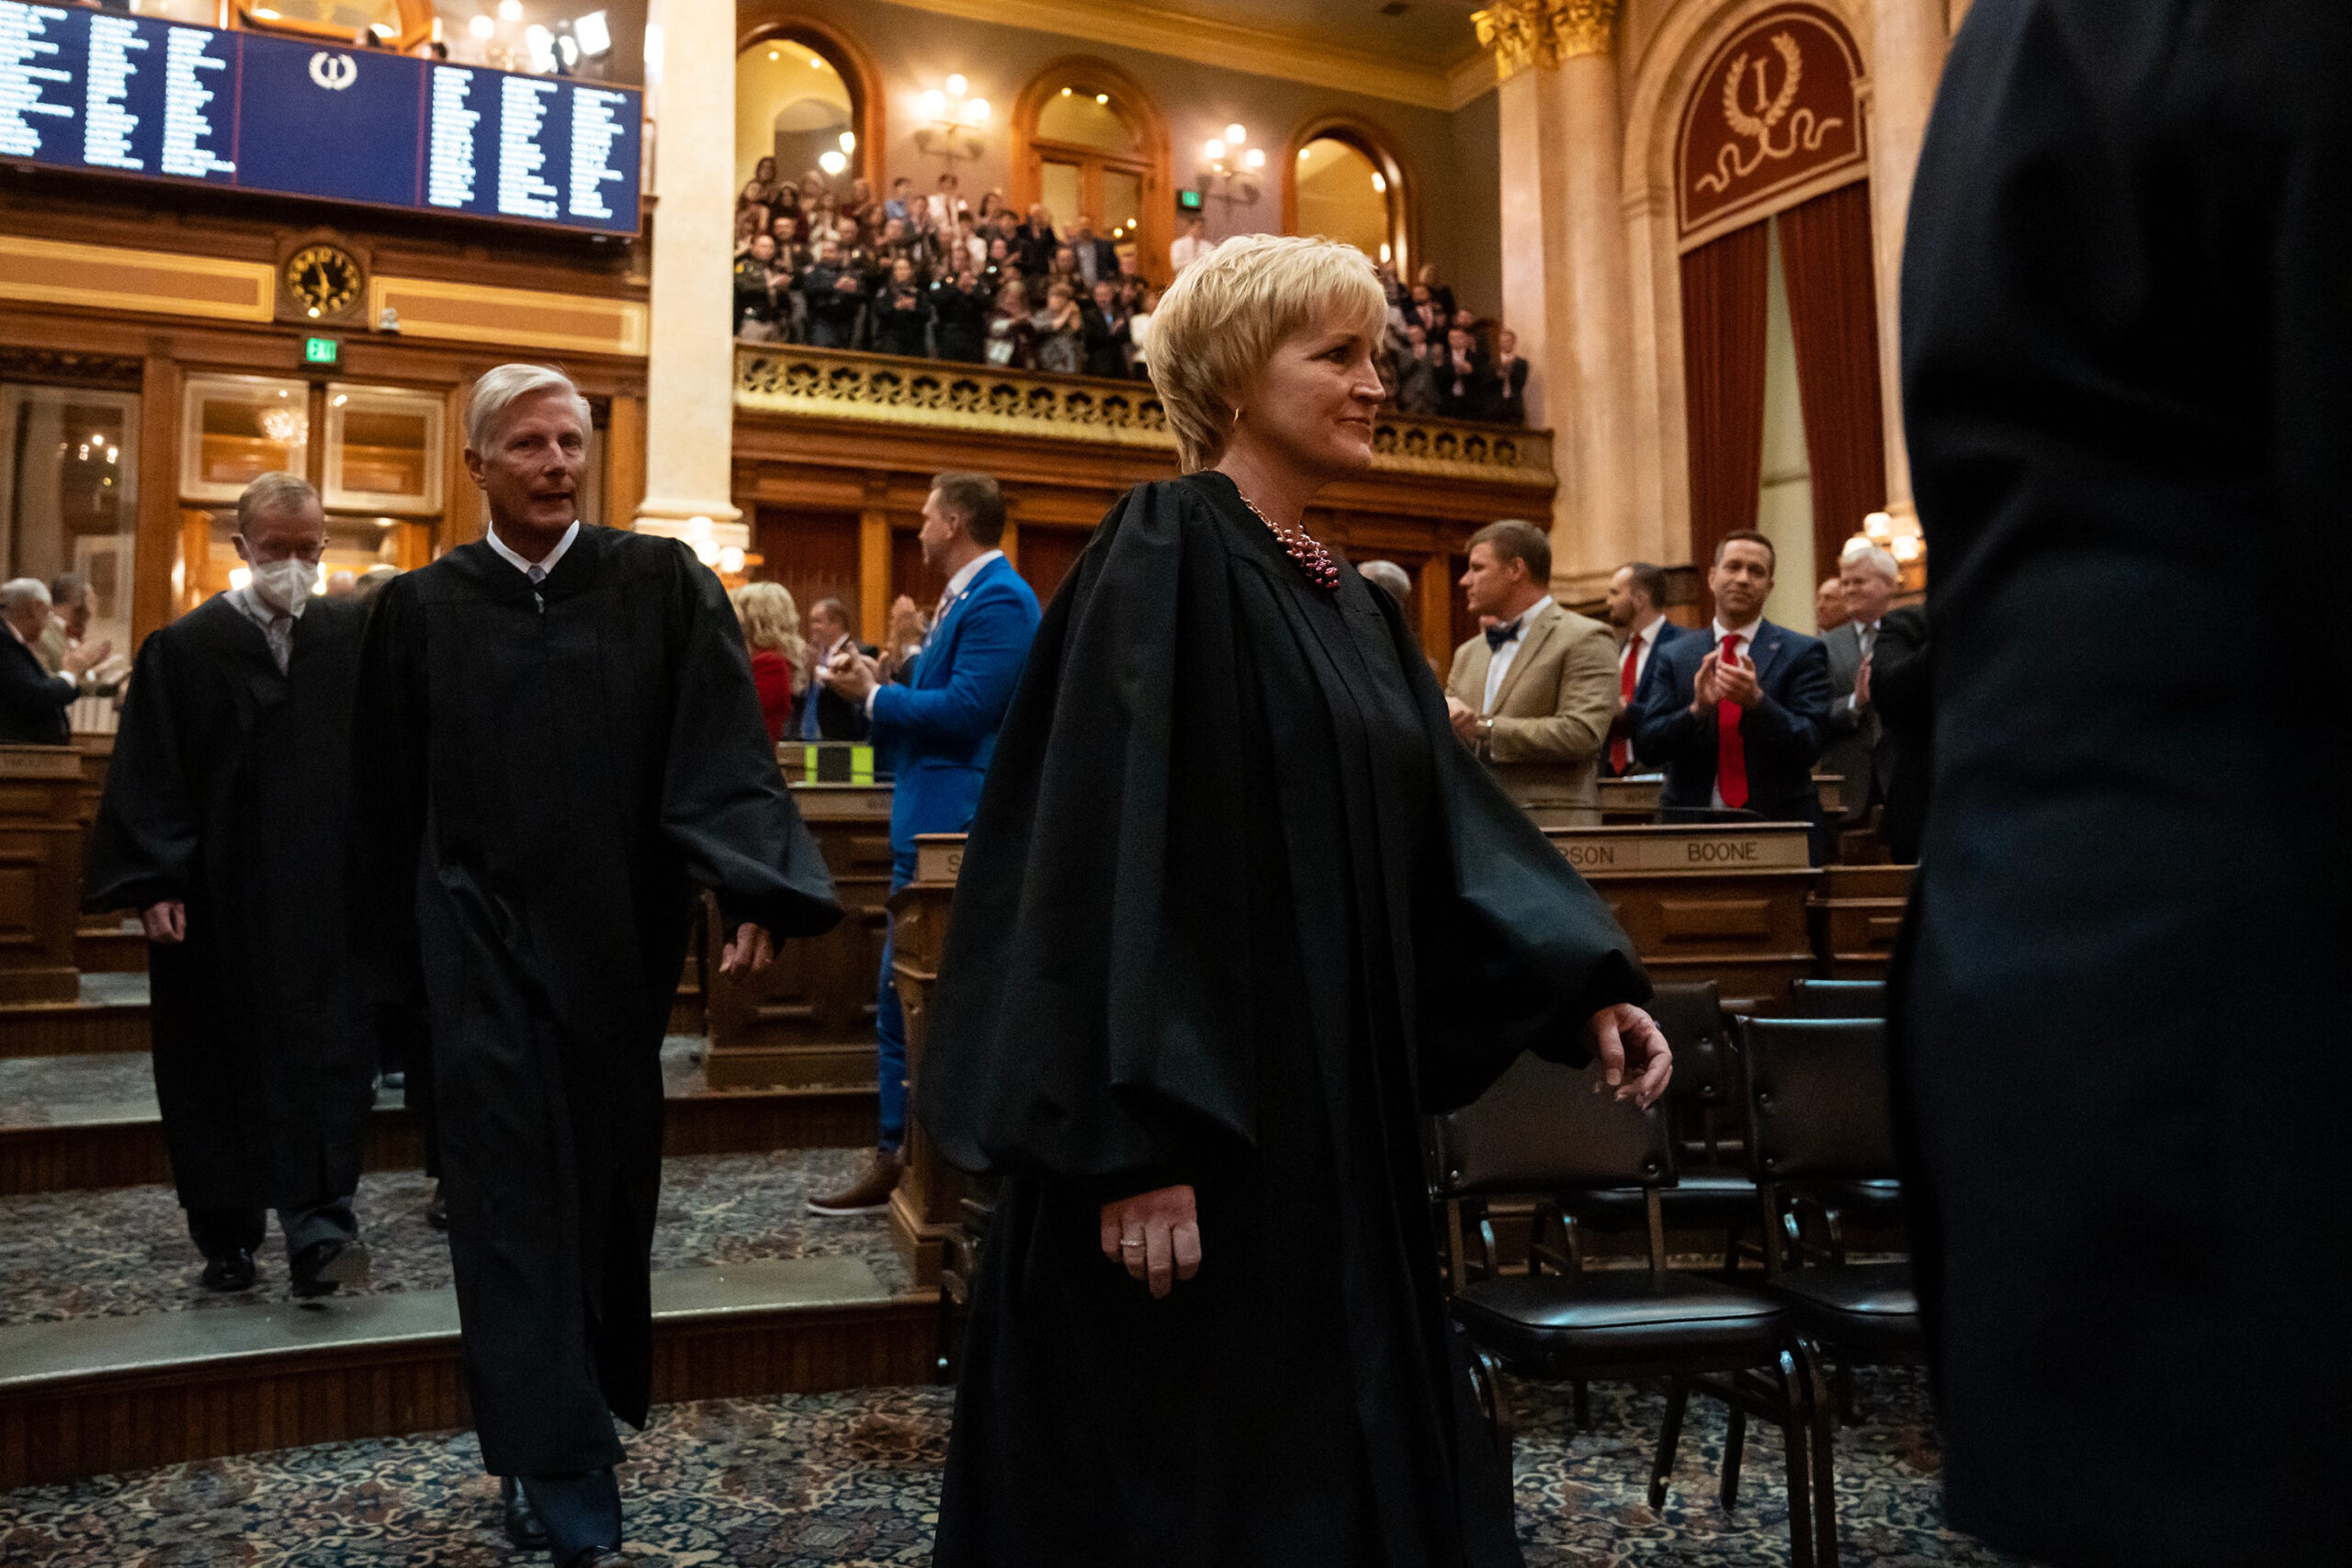 Iowa's Supreme Court Justices, lead by Chief Justice Susan Christensen, enter the Iowa House chamber